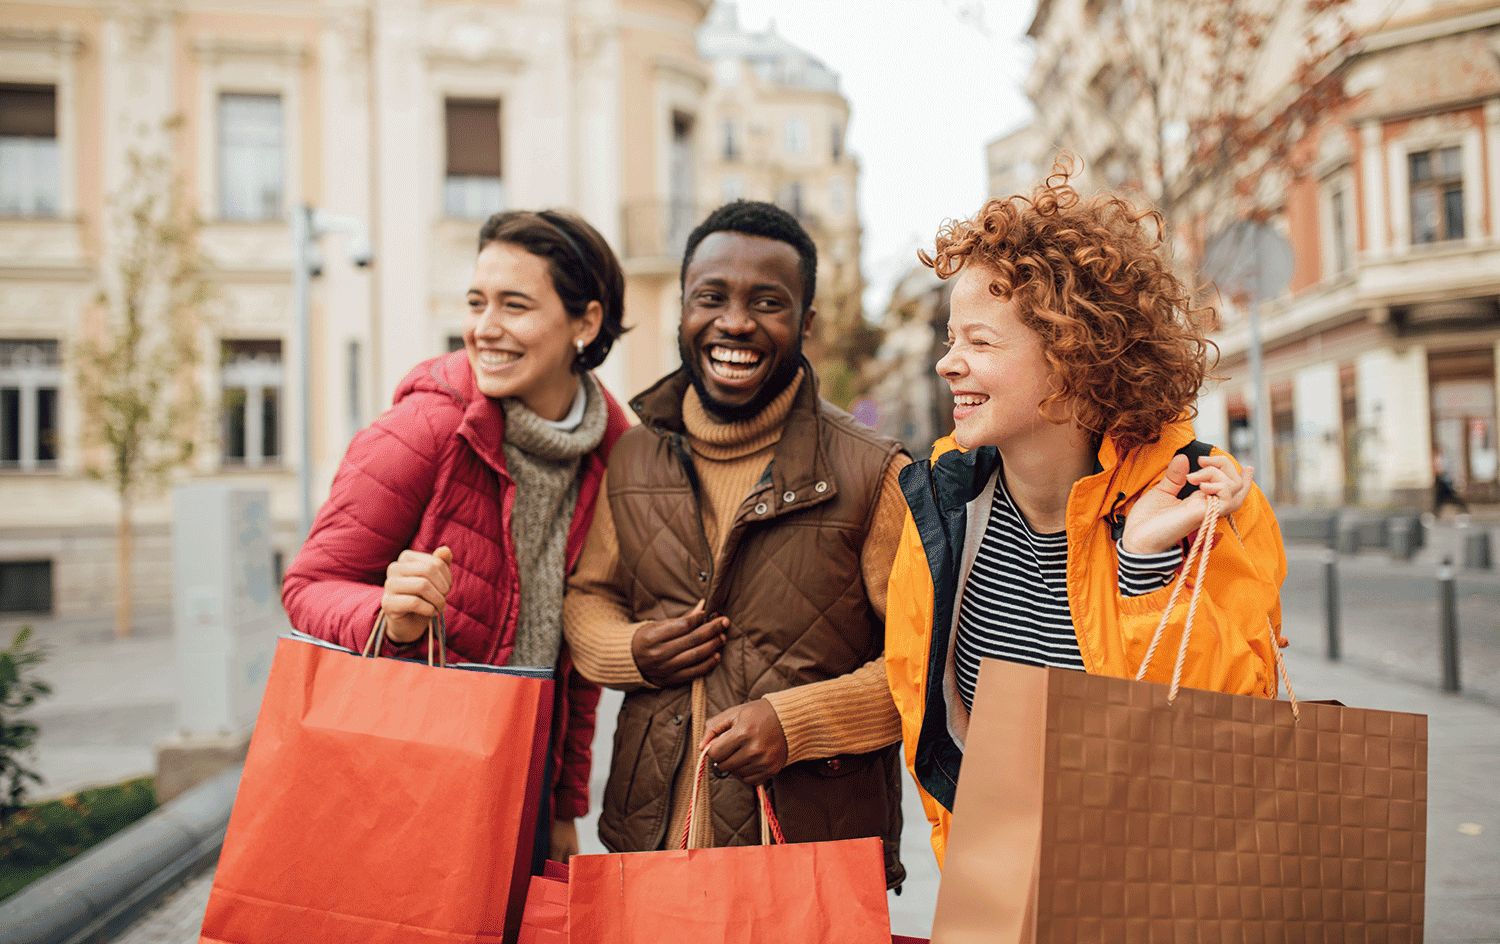 Three people with shopping bags smiling